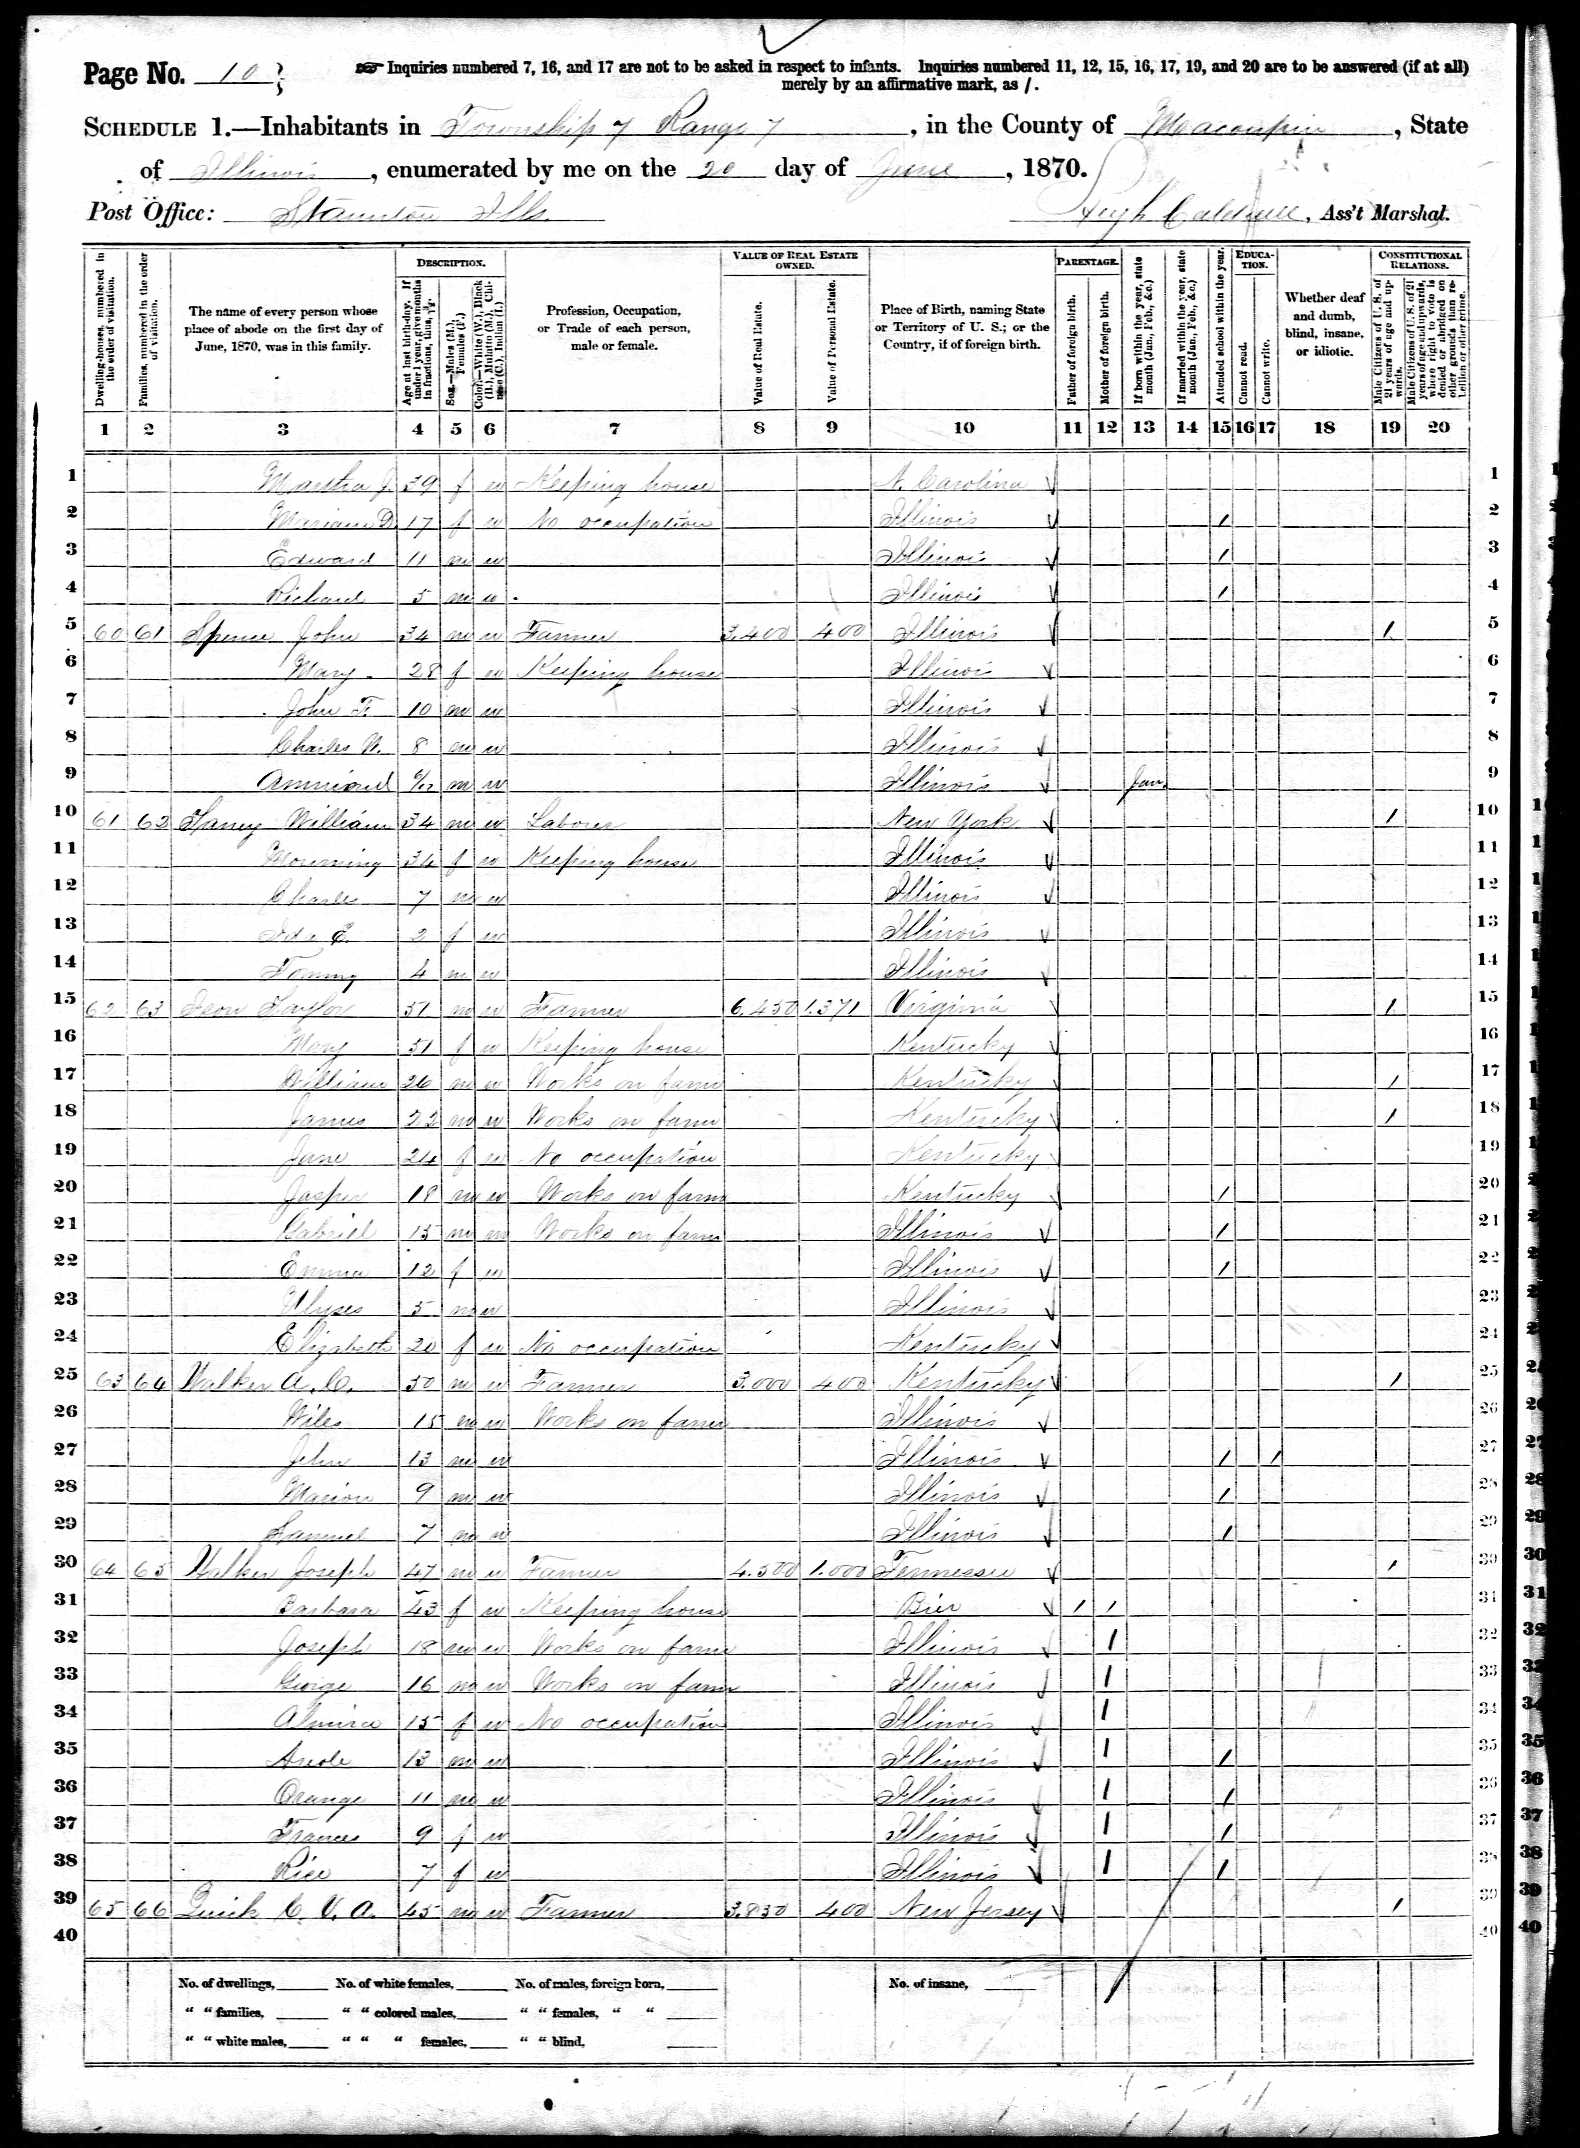 John Spence and wife Mary (Walker) Spence, 1870 Macoupin County, Illinois census. Mary was the daughter of John McLean Walker.